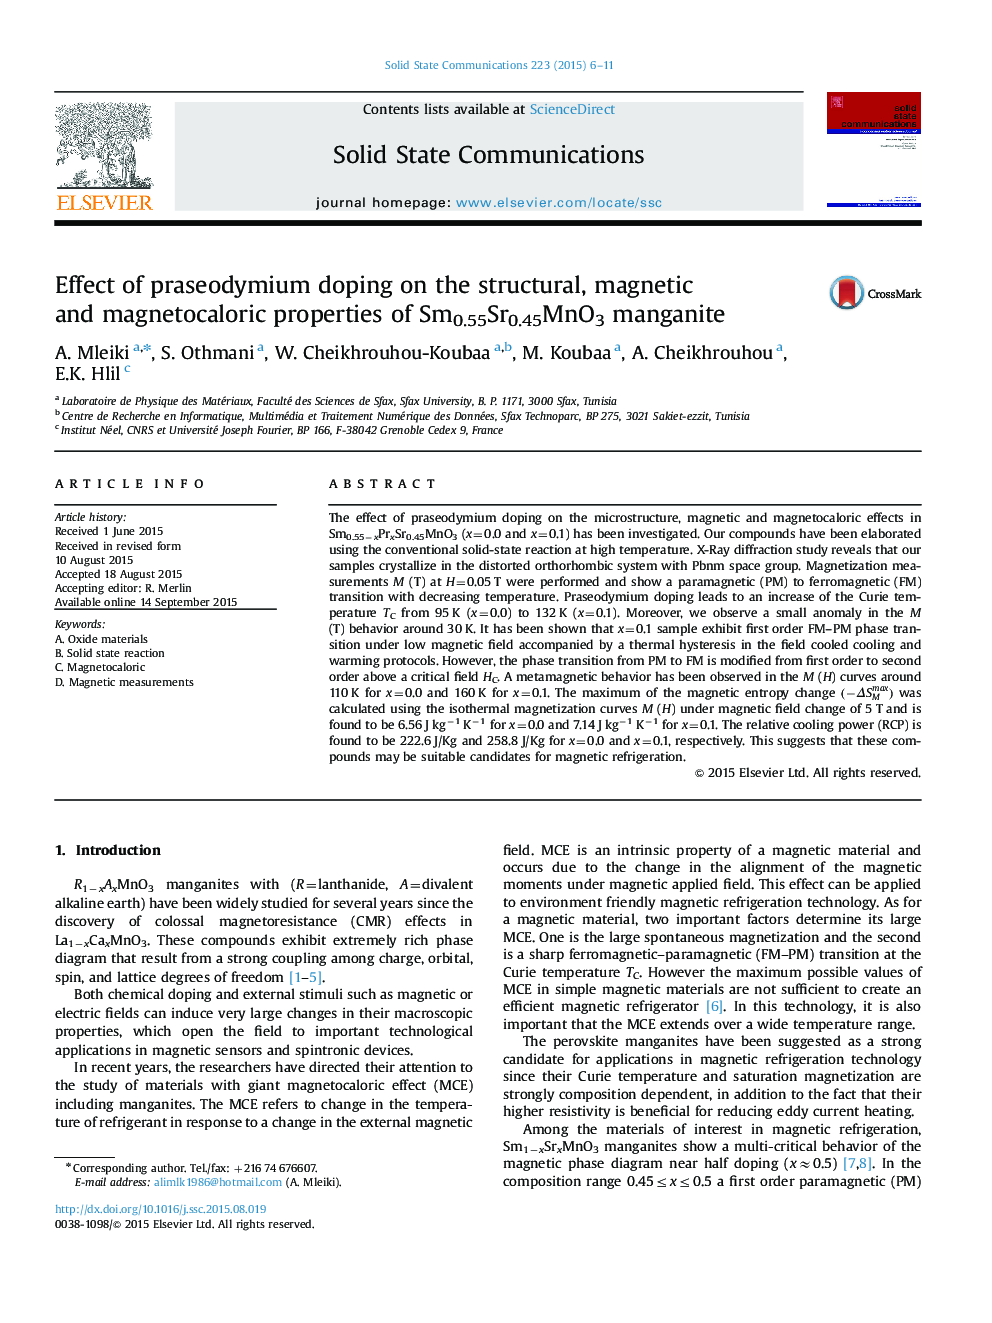 Effect of praseodymium doping on the structural, magnetic and magnetocaloric properties of Sm0.55Sr0.45MnO3 manganite